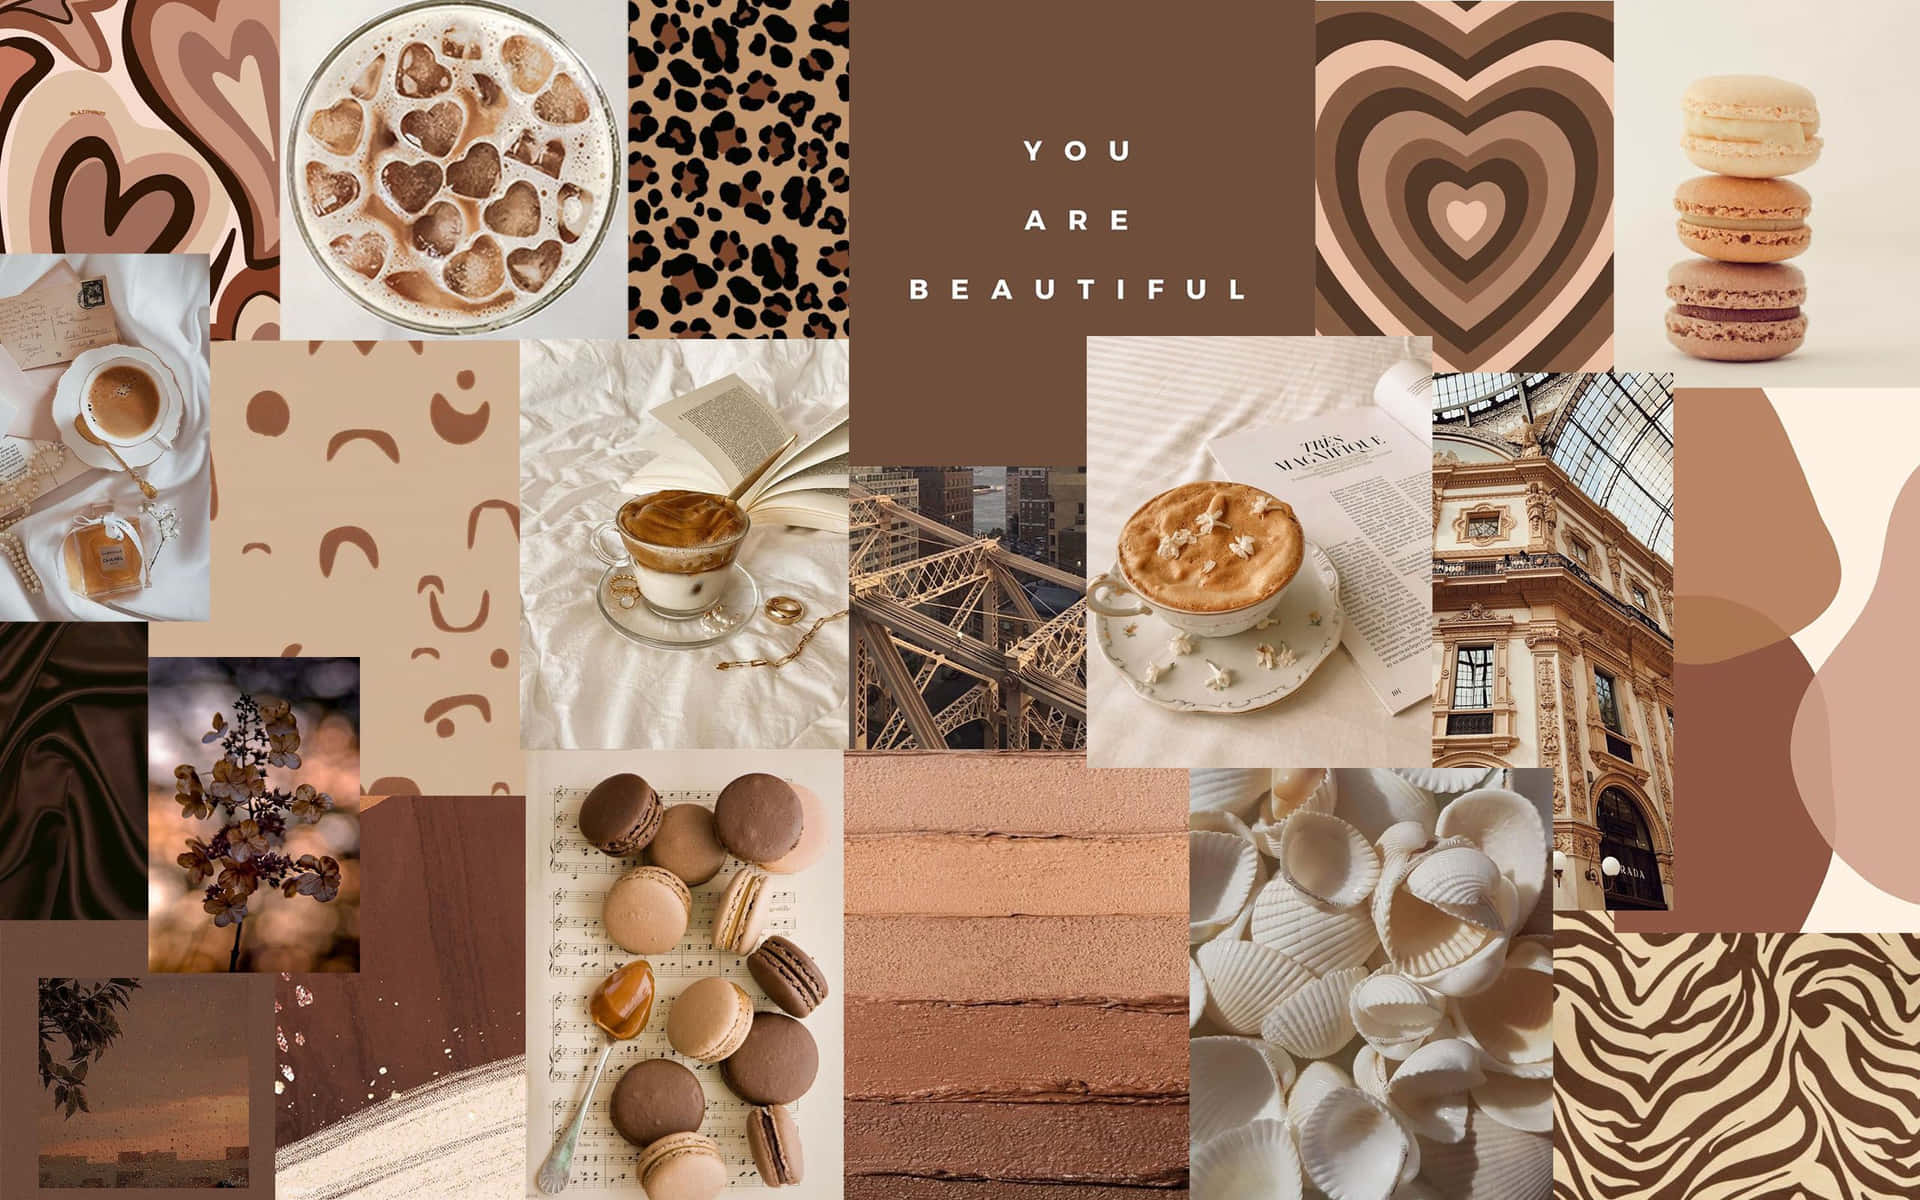 Aesthetic Brown Wallpaper – An Added Element Of Beauty